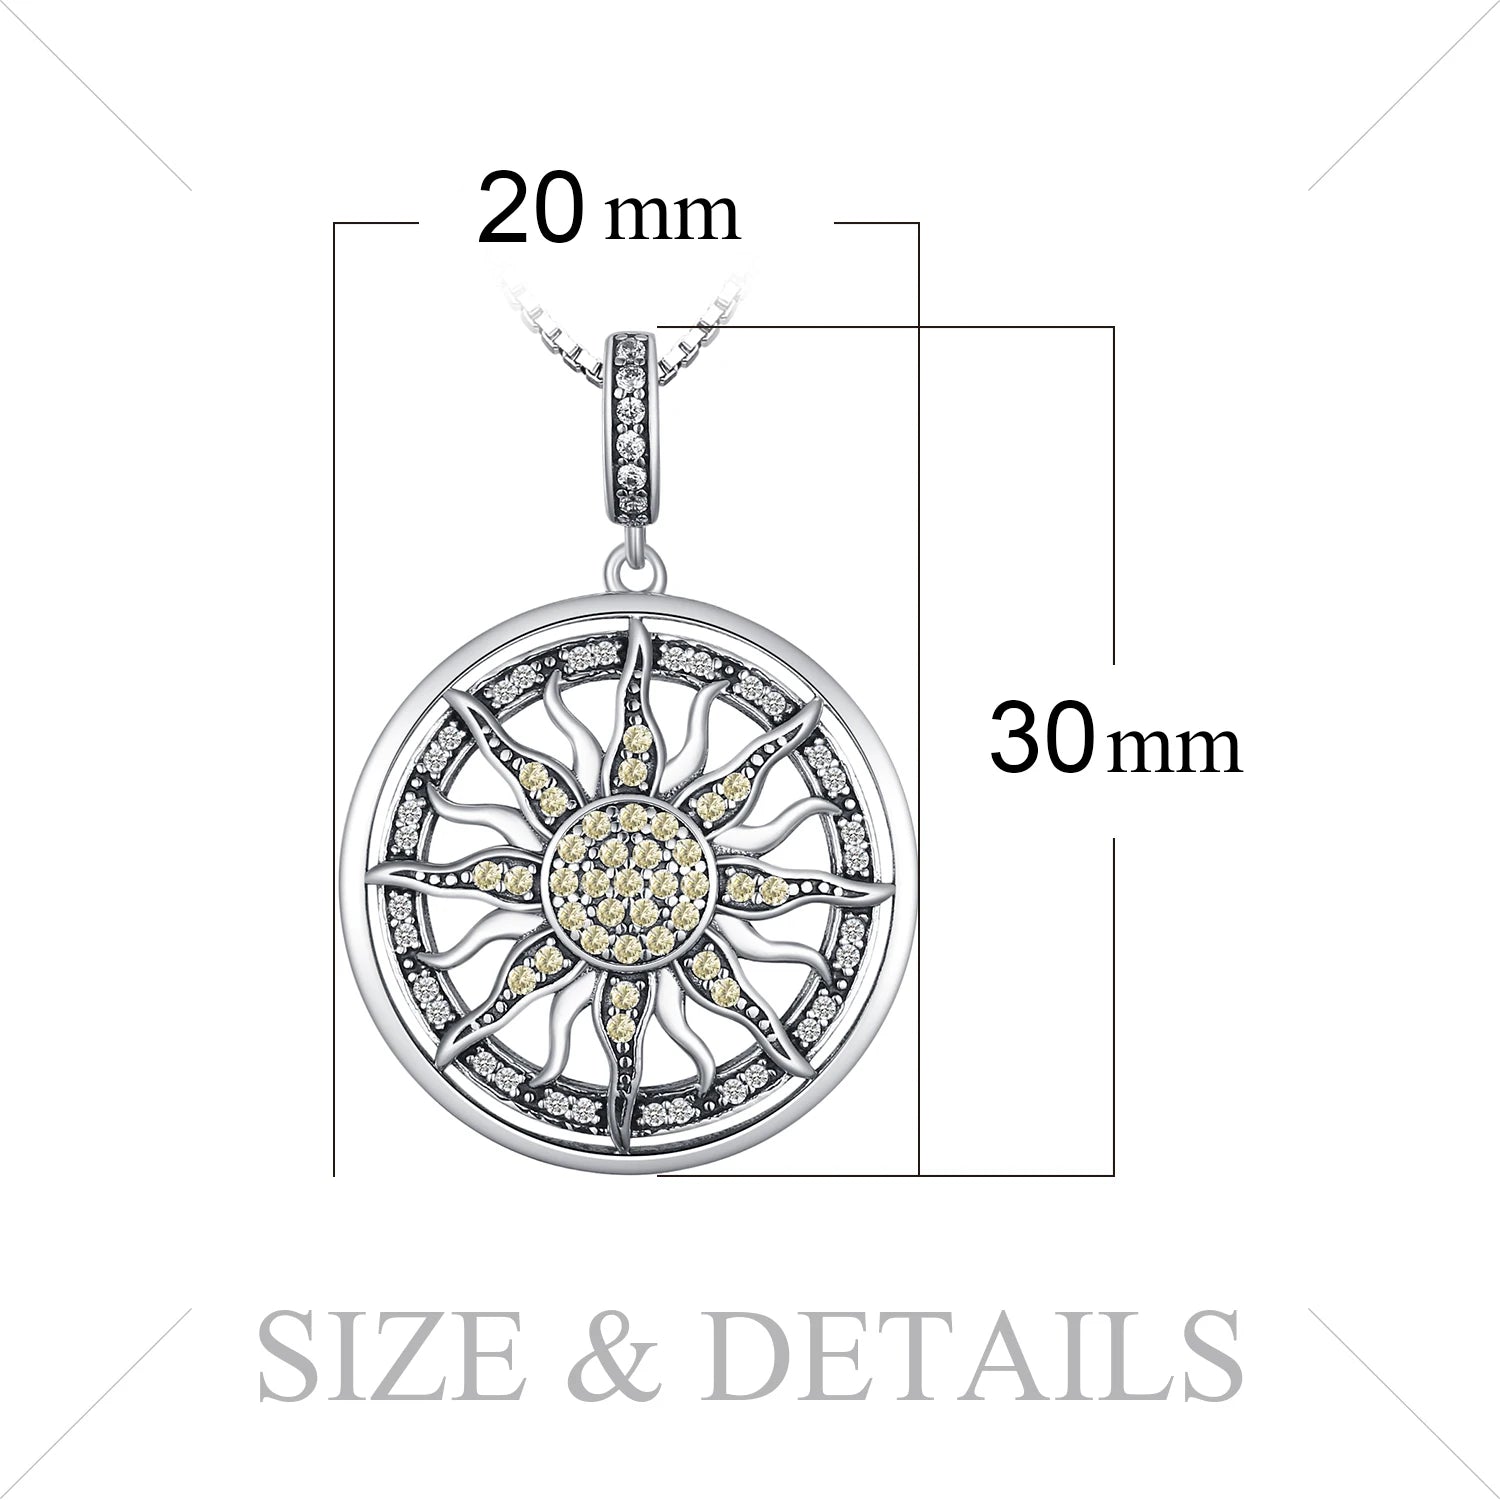 Celestial Sun Cubic Zirconia 925 Sterling Silver Pendant Necklace for Women Girl No Chain Fashion Jewelry Gift